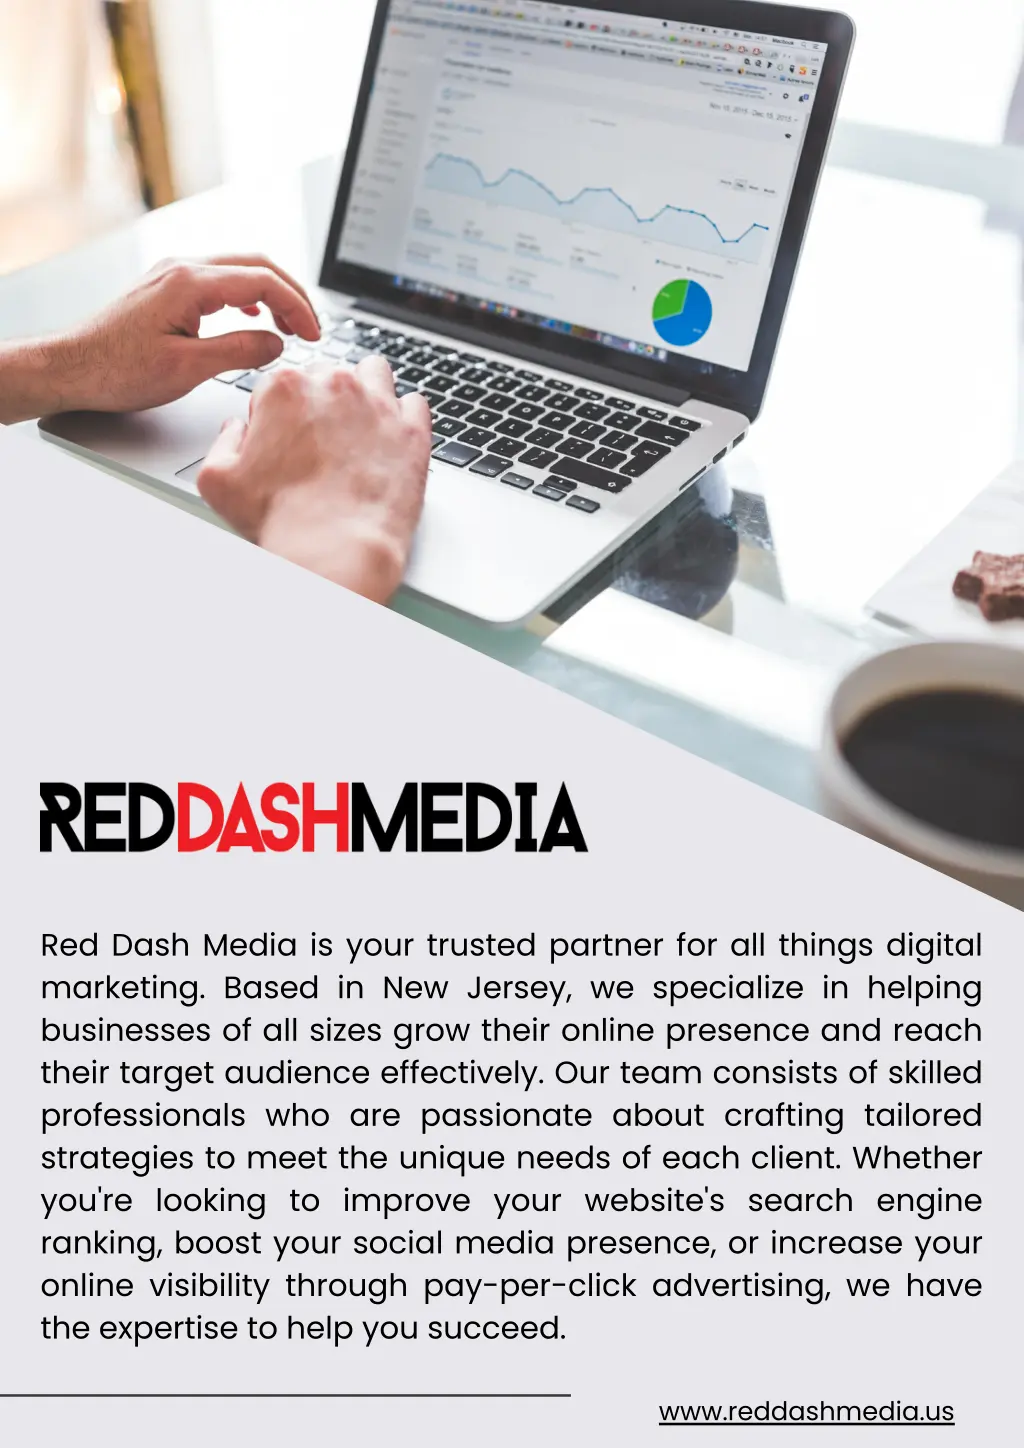 red dash media is your trusted partner